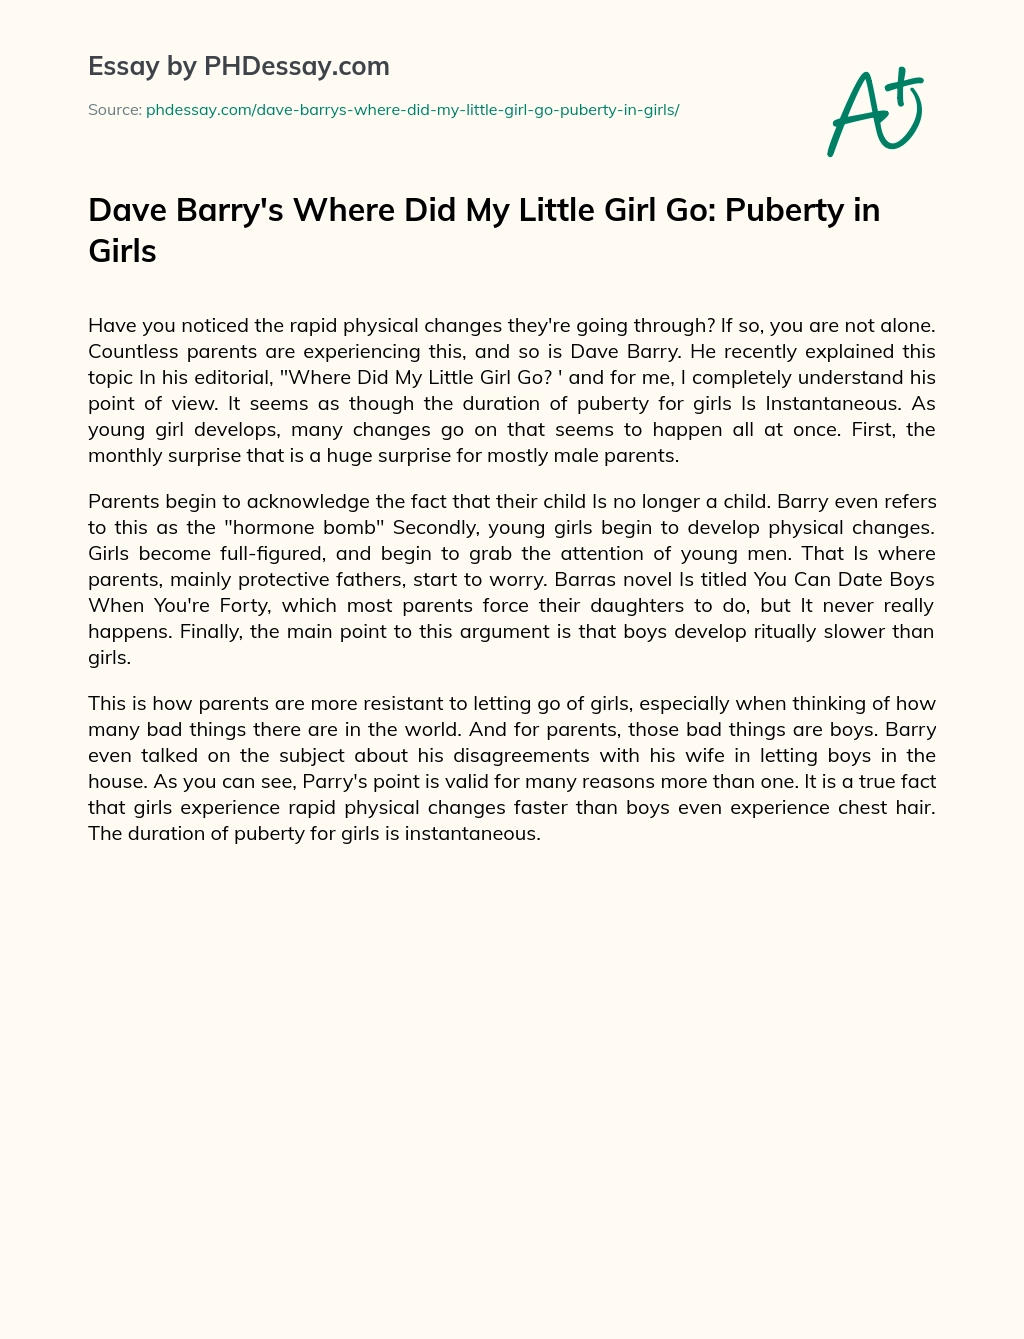 Dave Barry’s Where Did My Little Girl Go: Puberty in Girls essay